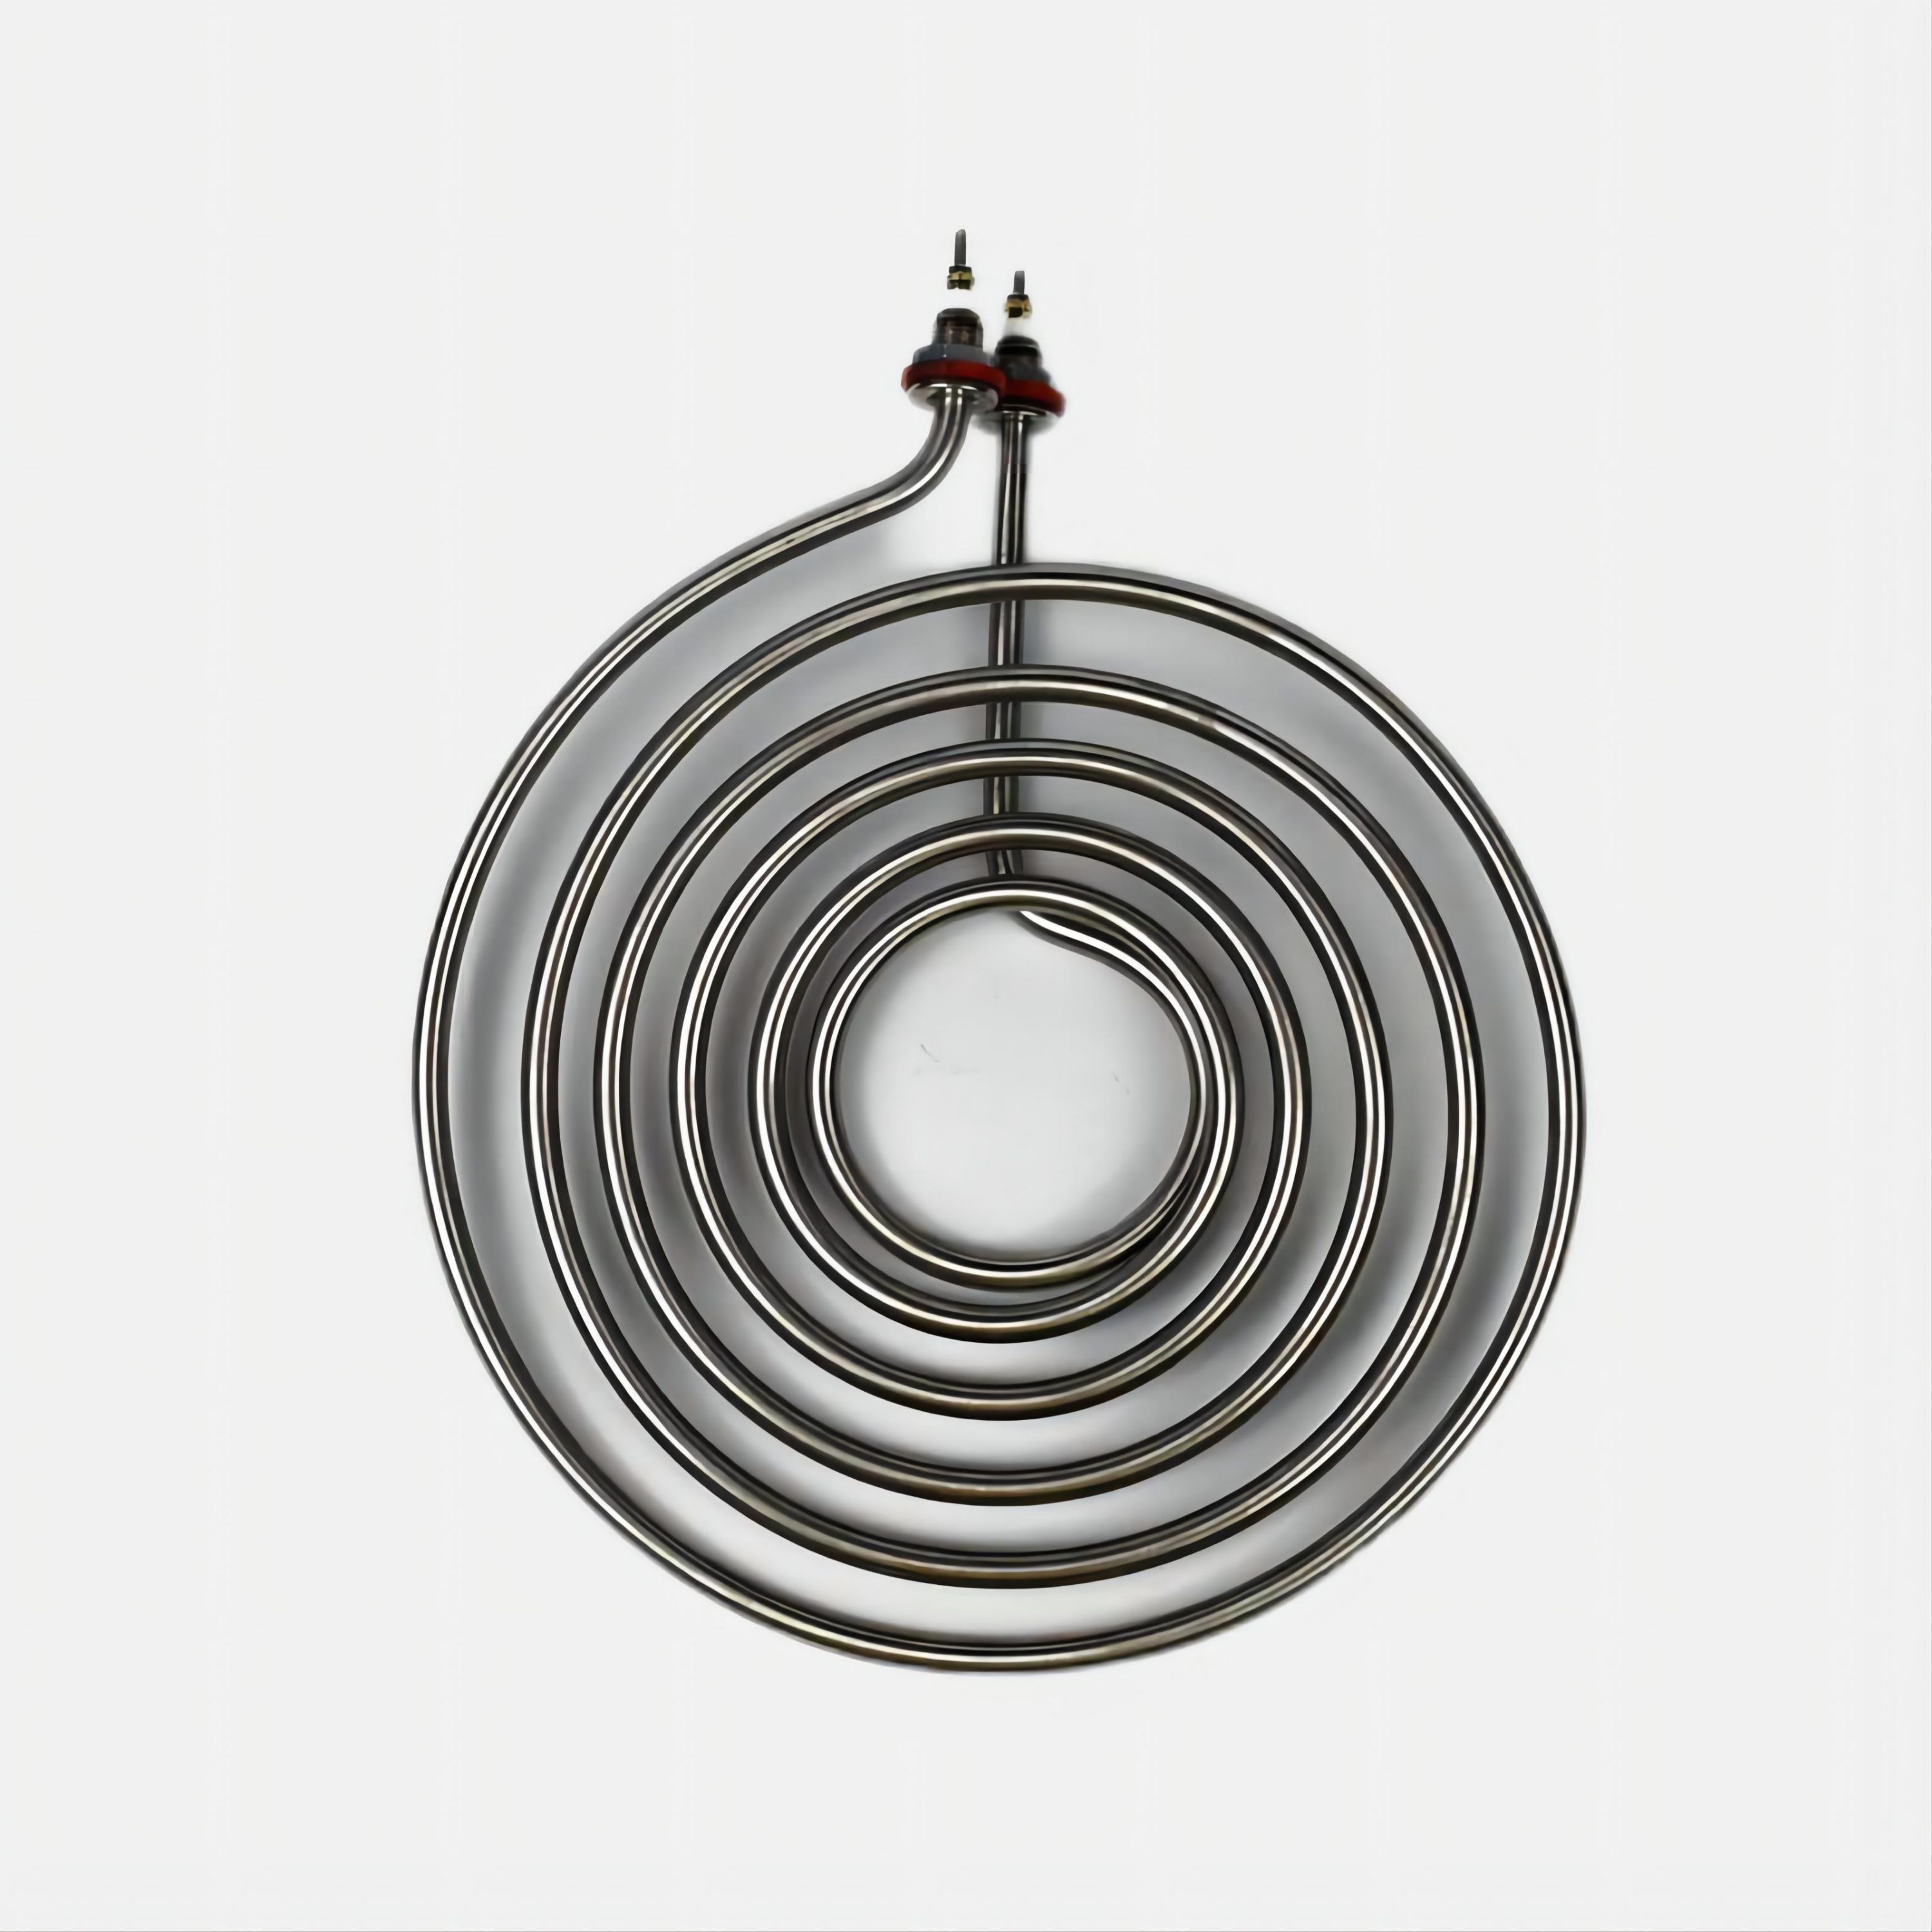 Picture of Stainless Steel Oven Coil Heating Element Tubular Heater